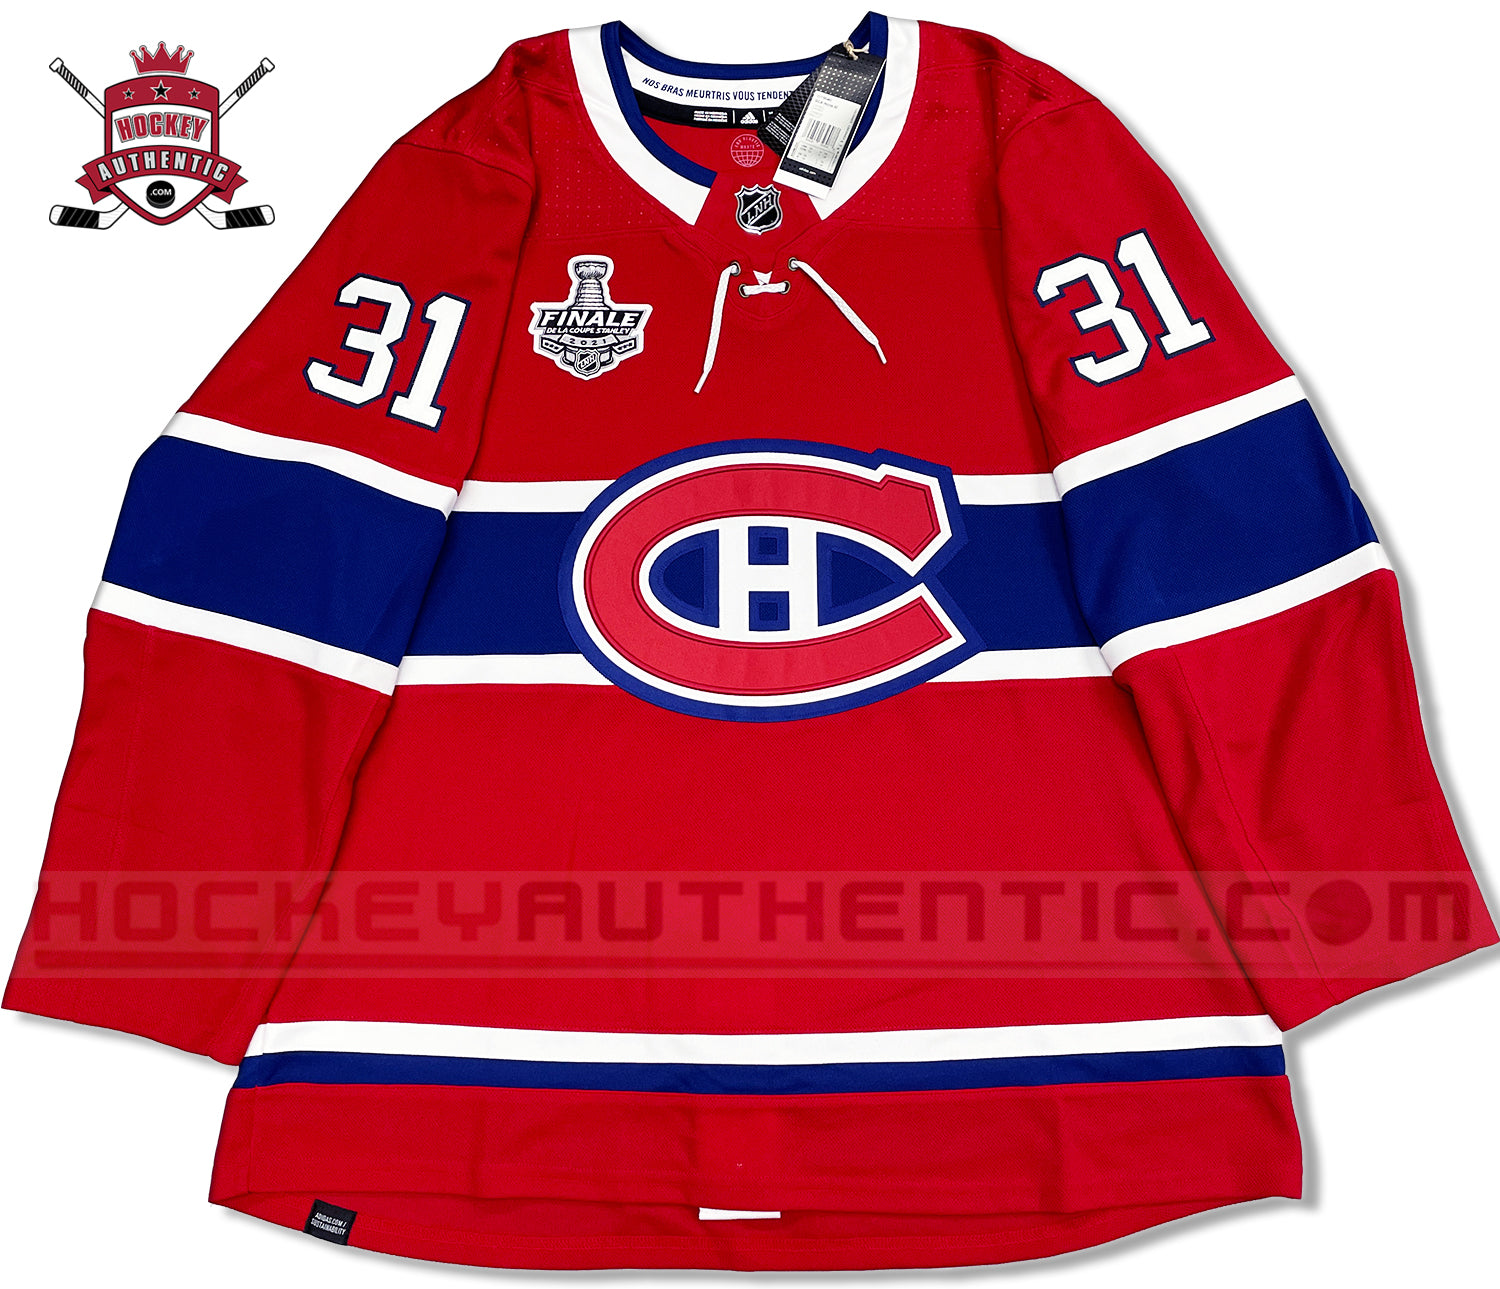 Montreal Canadiens Shirts, Montreal Canadiens Sweaters, Canadiens